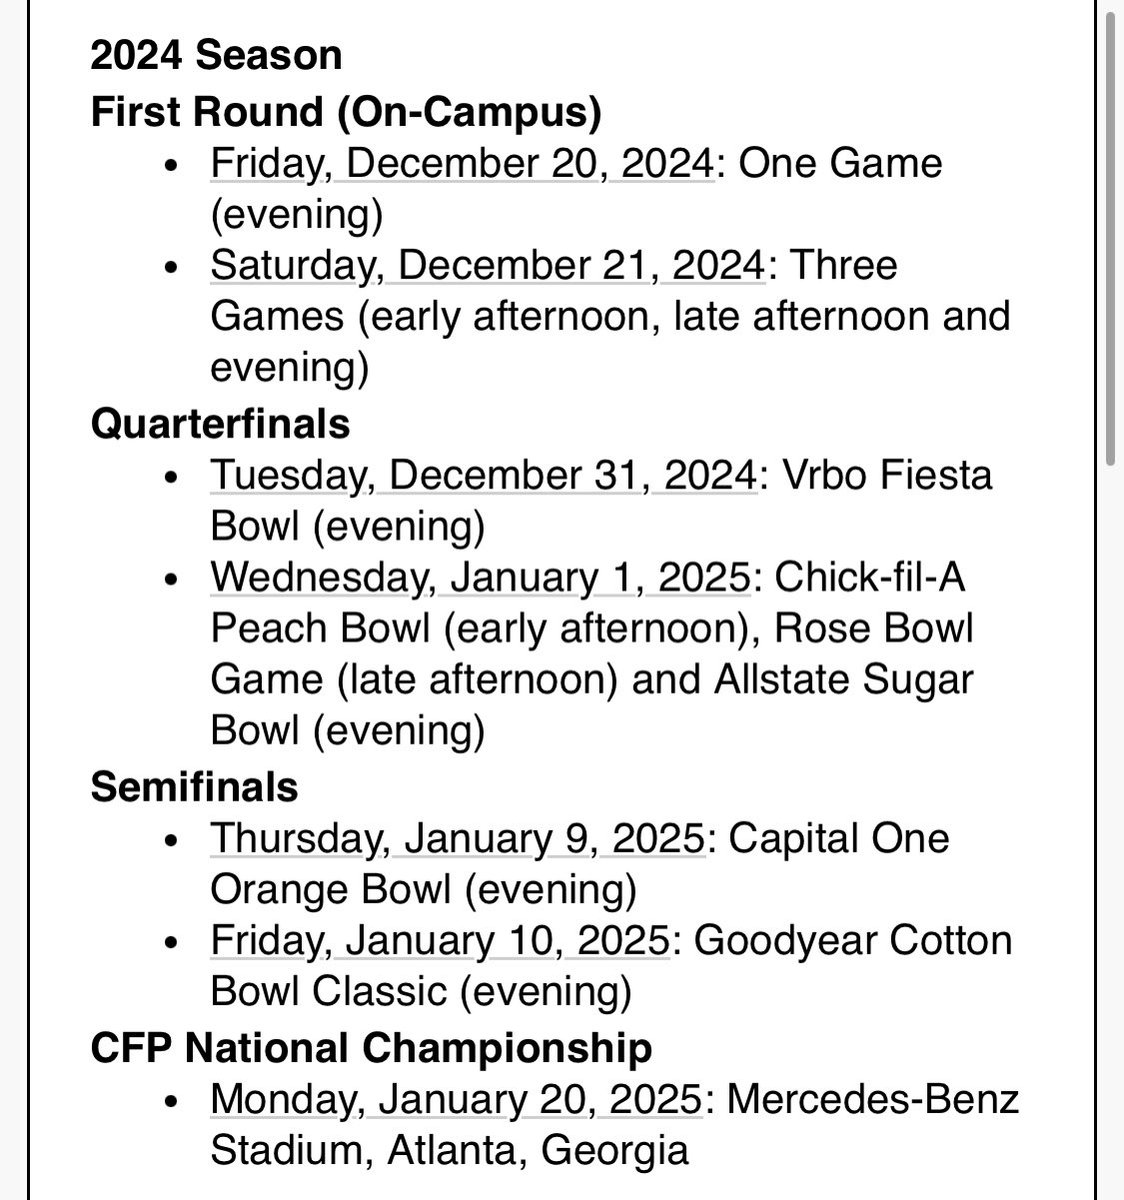 RedditCFB on Twitter "The dates for the 2024 CFP expanded playoff